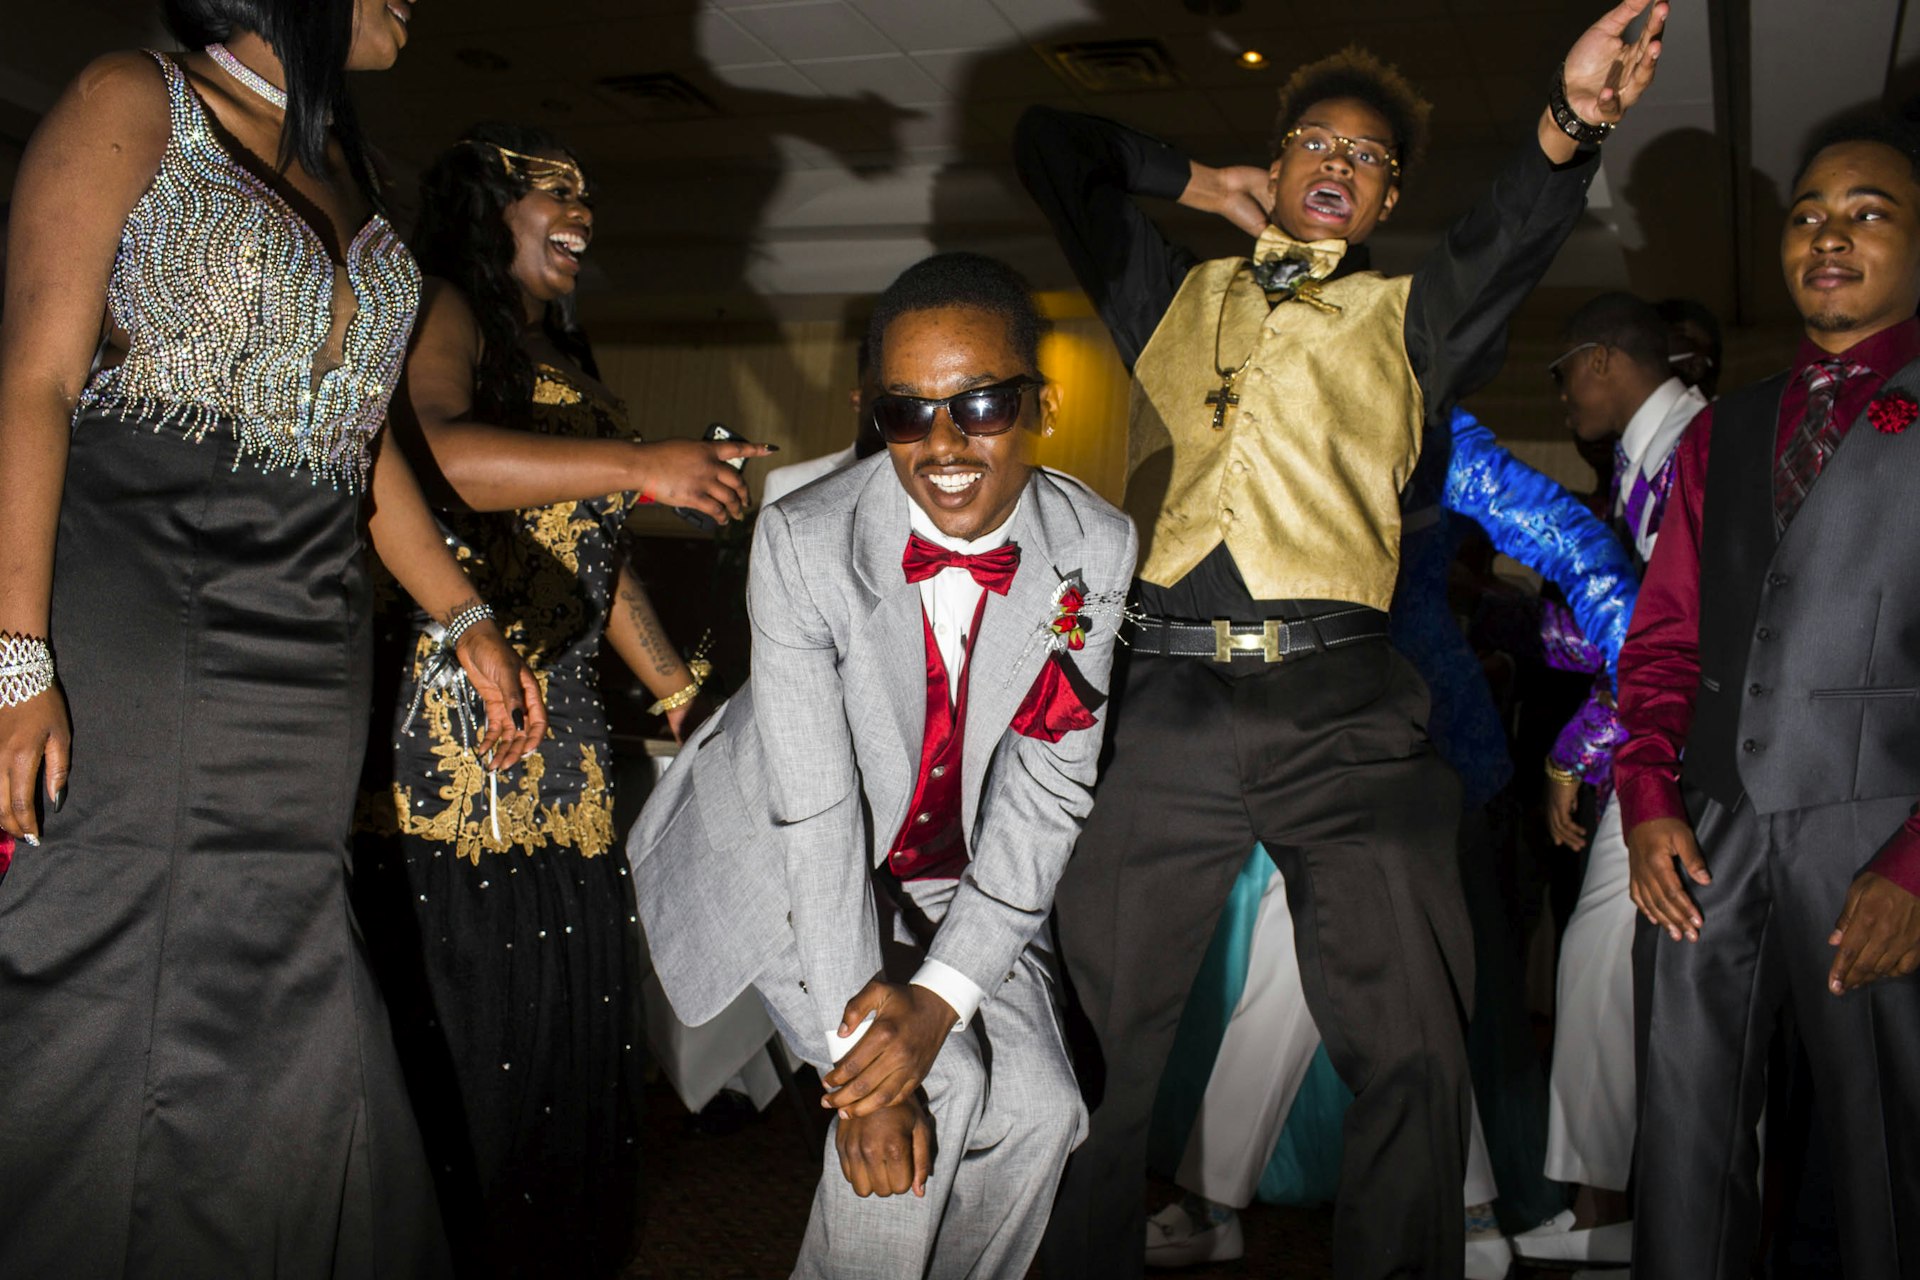 Unidentified students dance during their high school prom on Saturday, May 21, 2016 in Flint, Michigan.